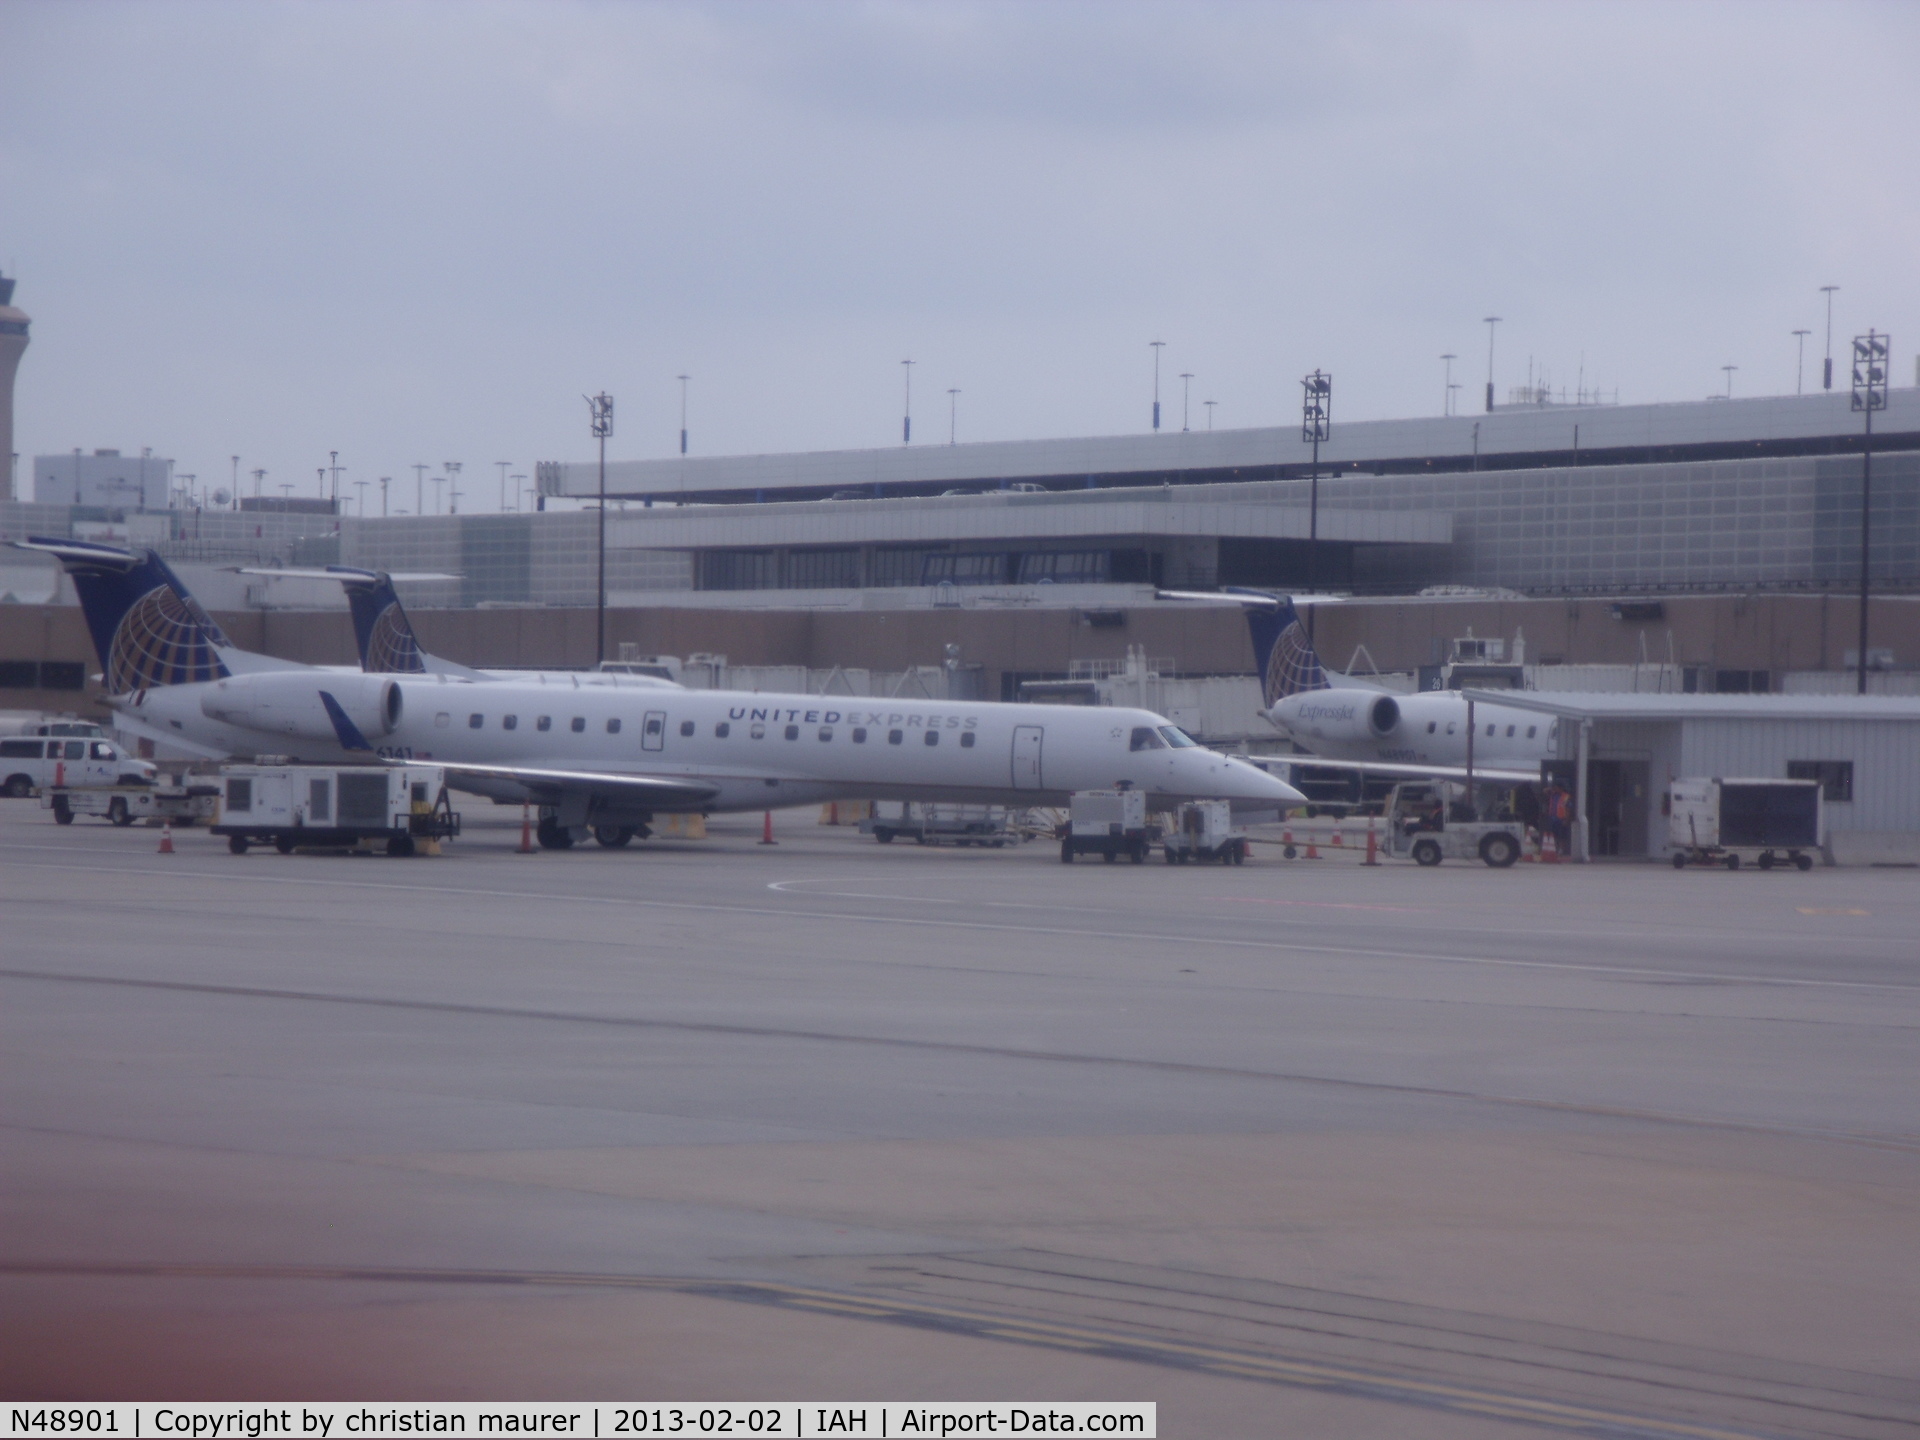 N48901, 2001 Embraer EMB-145LR C/N 145501, old continental express livery now used by united.
behind the erj-145 with UA LIVERY